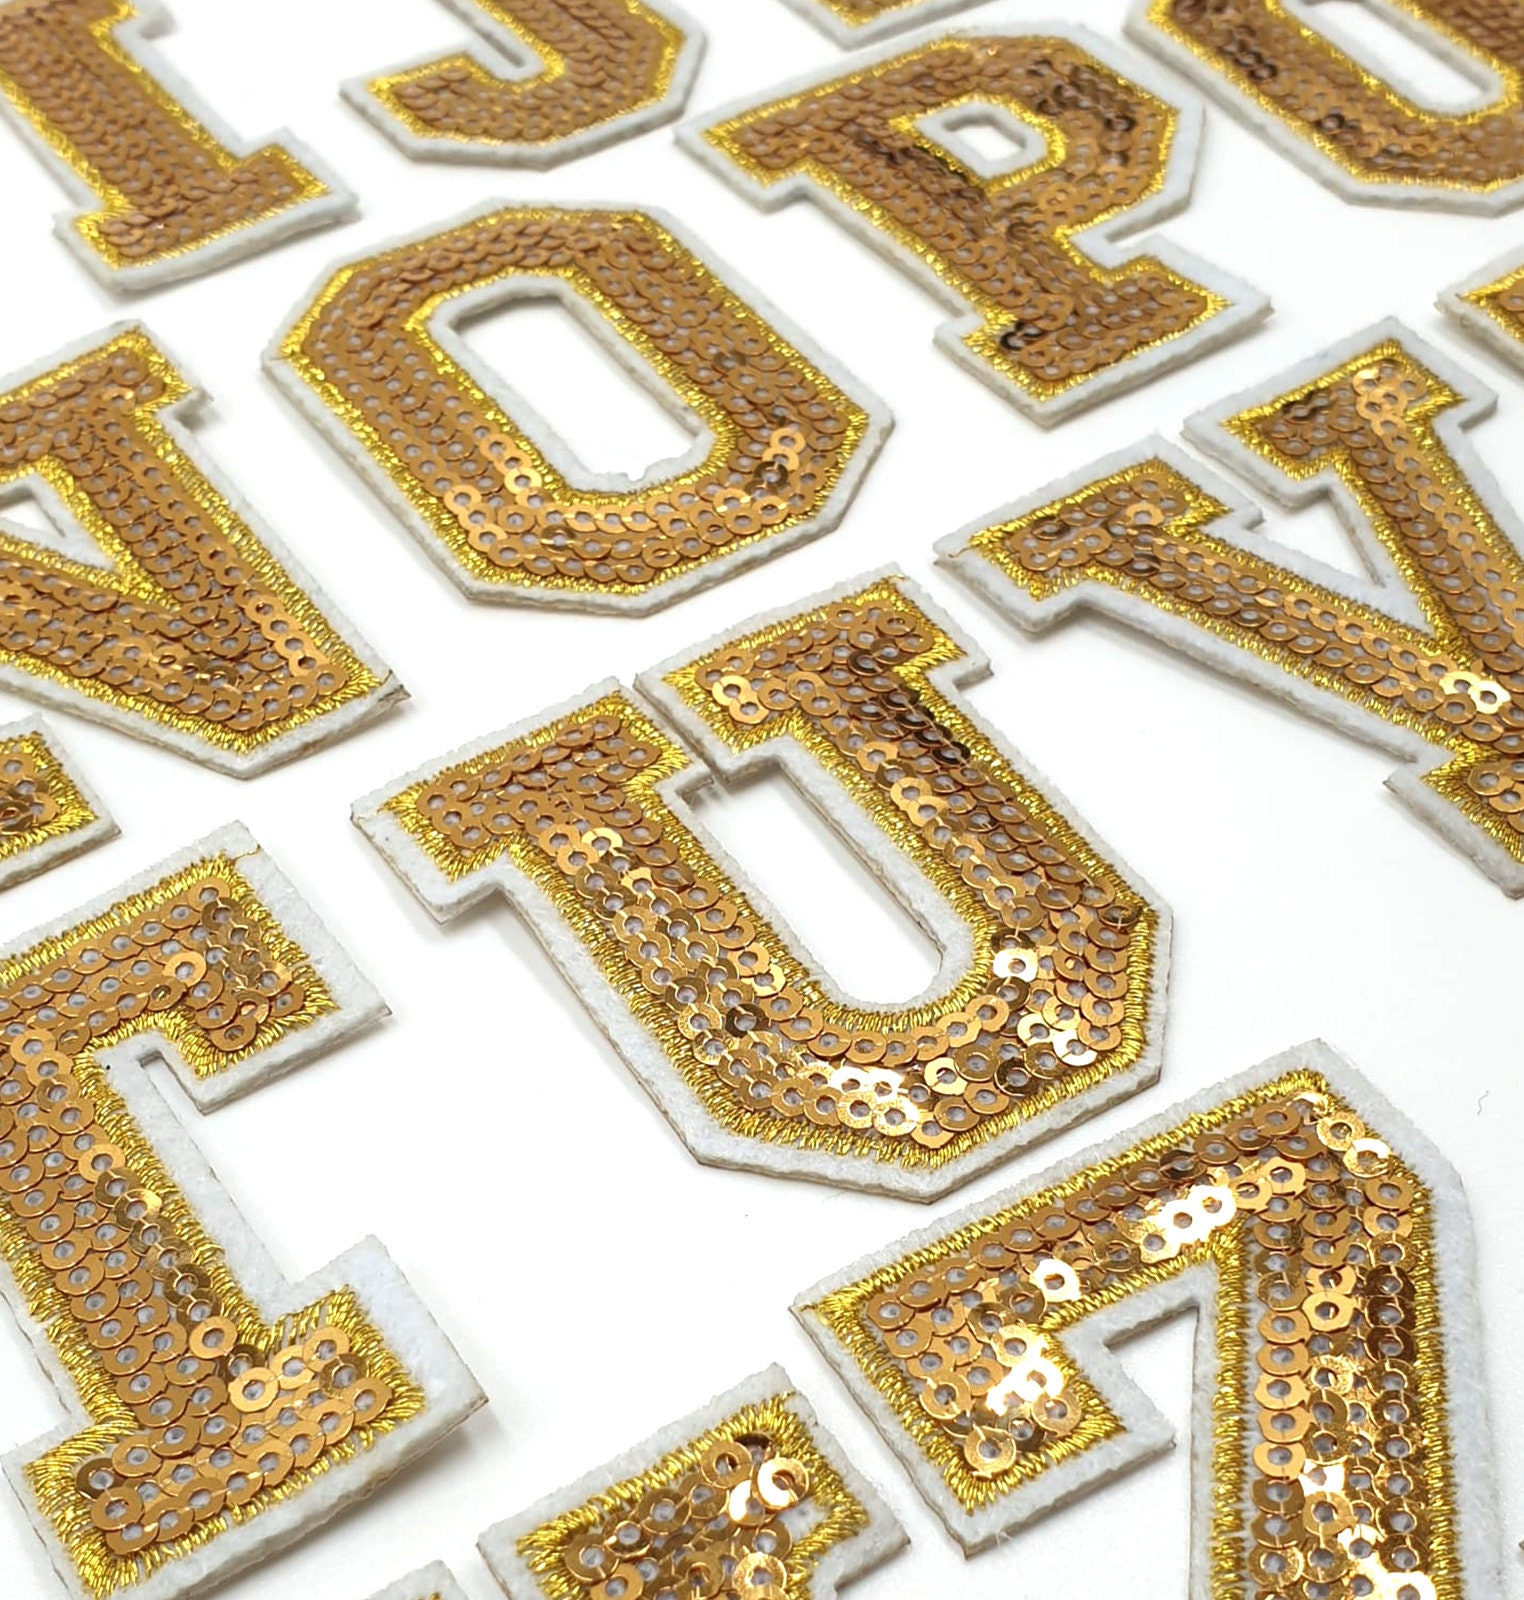  52Pcs Gold Iron on Letters for Clothing, Iron on Patches for  Clothing,1.6” x 2”